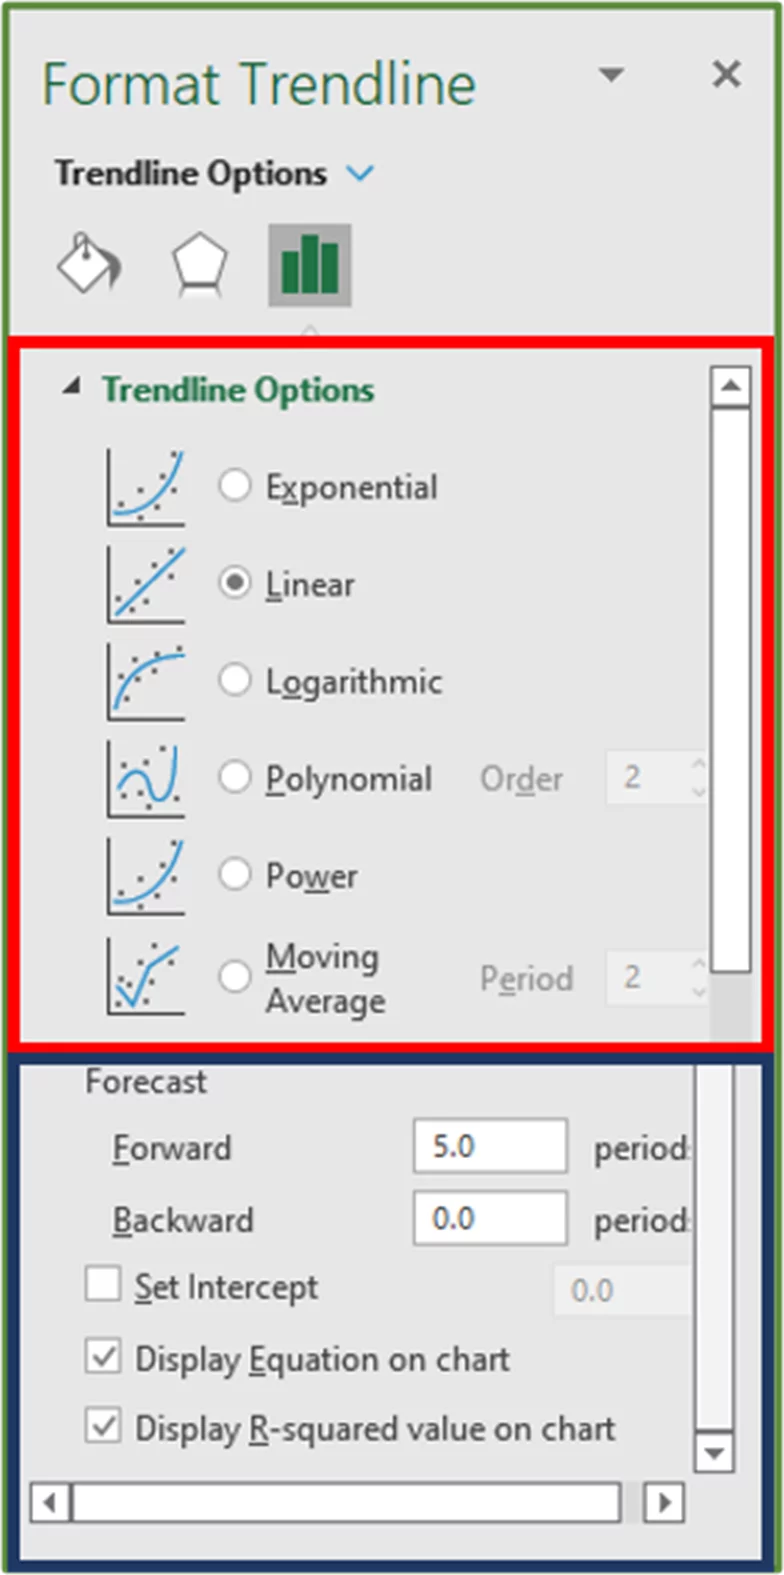 Screenshot showing the Format Trendline Pane with the sections of interest highlighted.